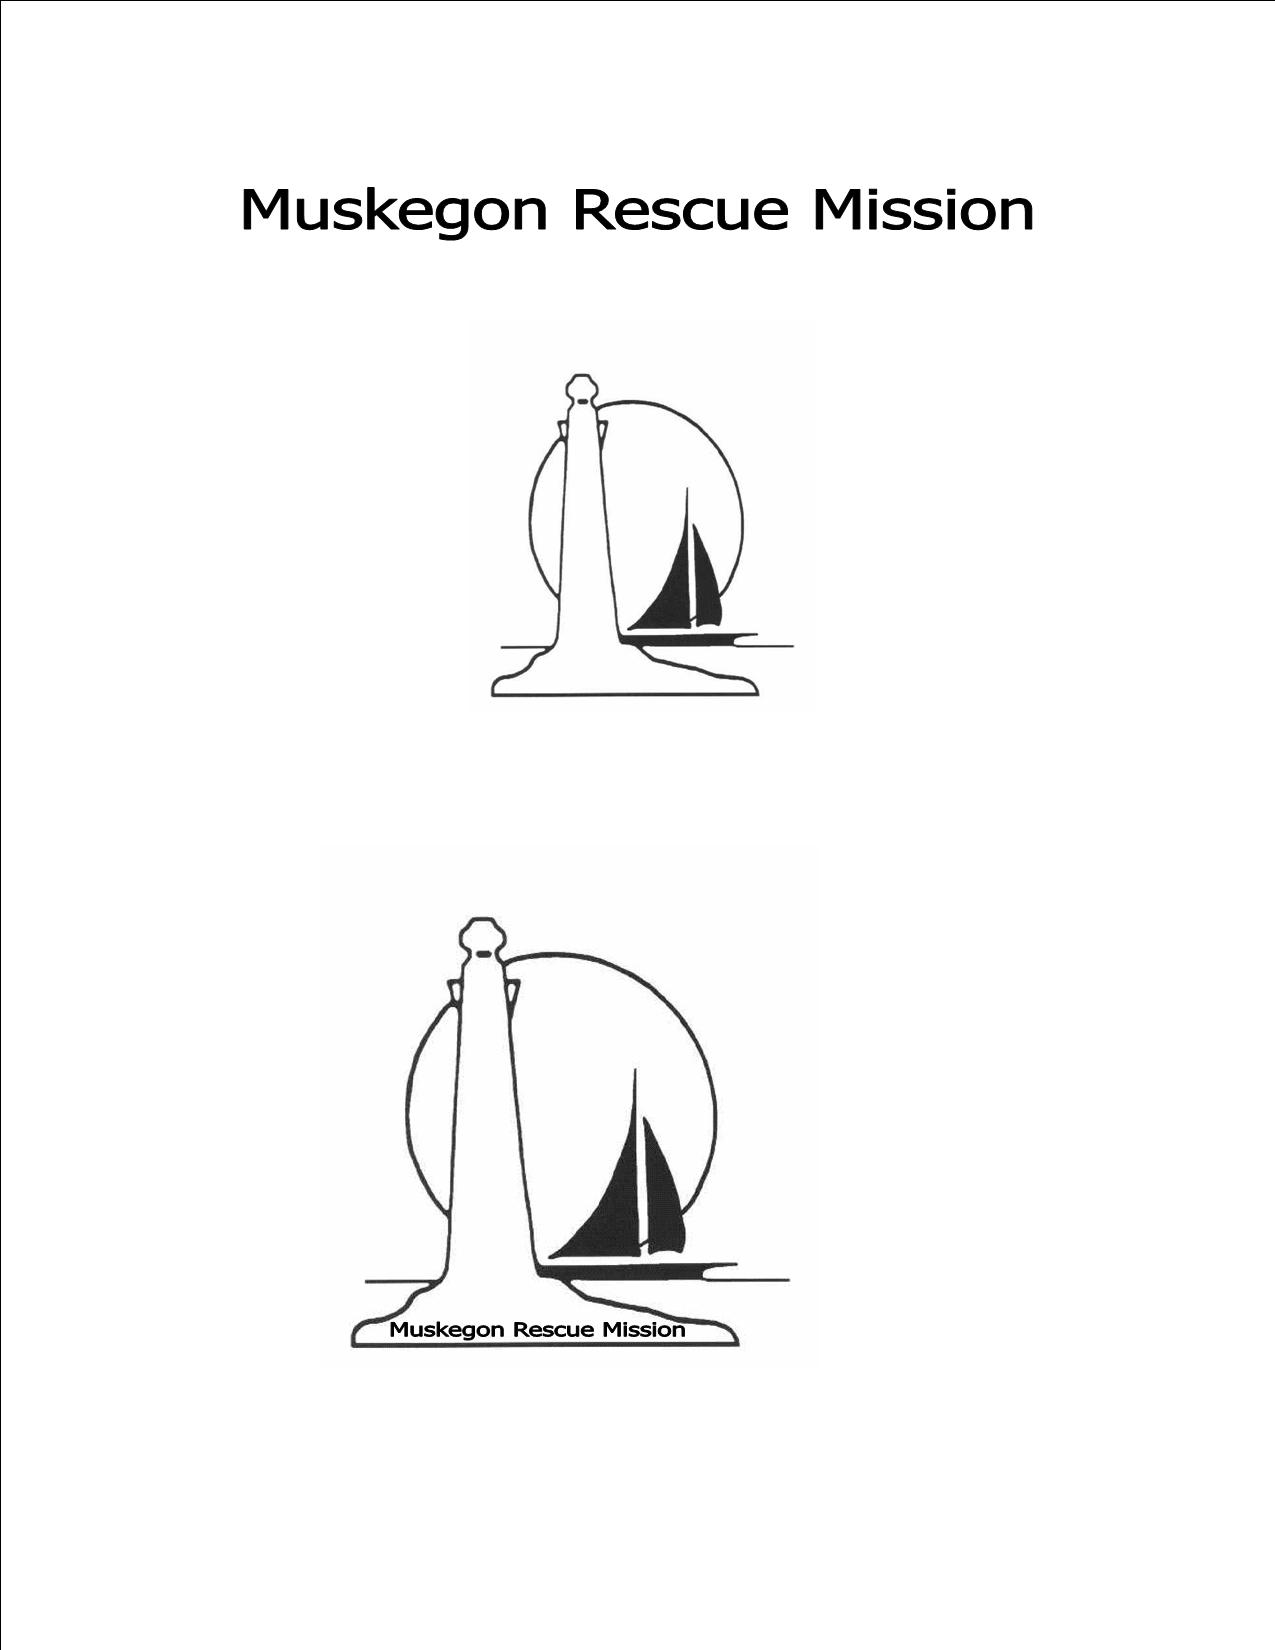 Muskegon Rescue Mission